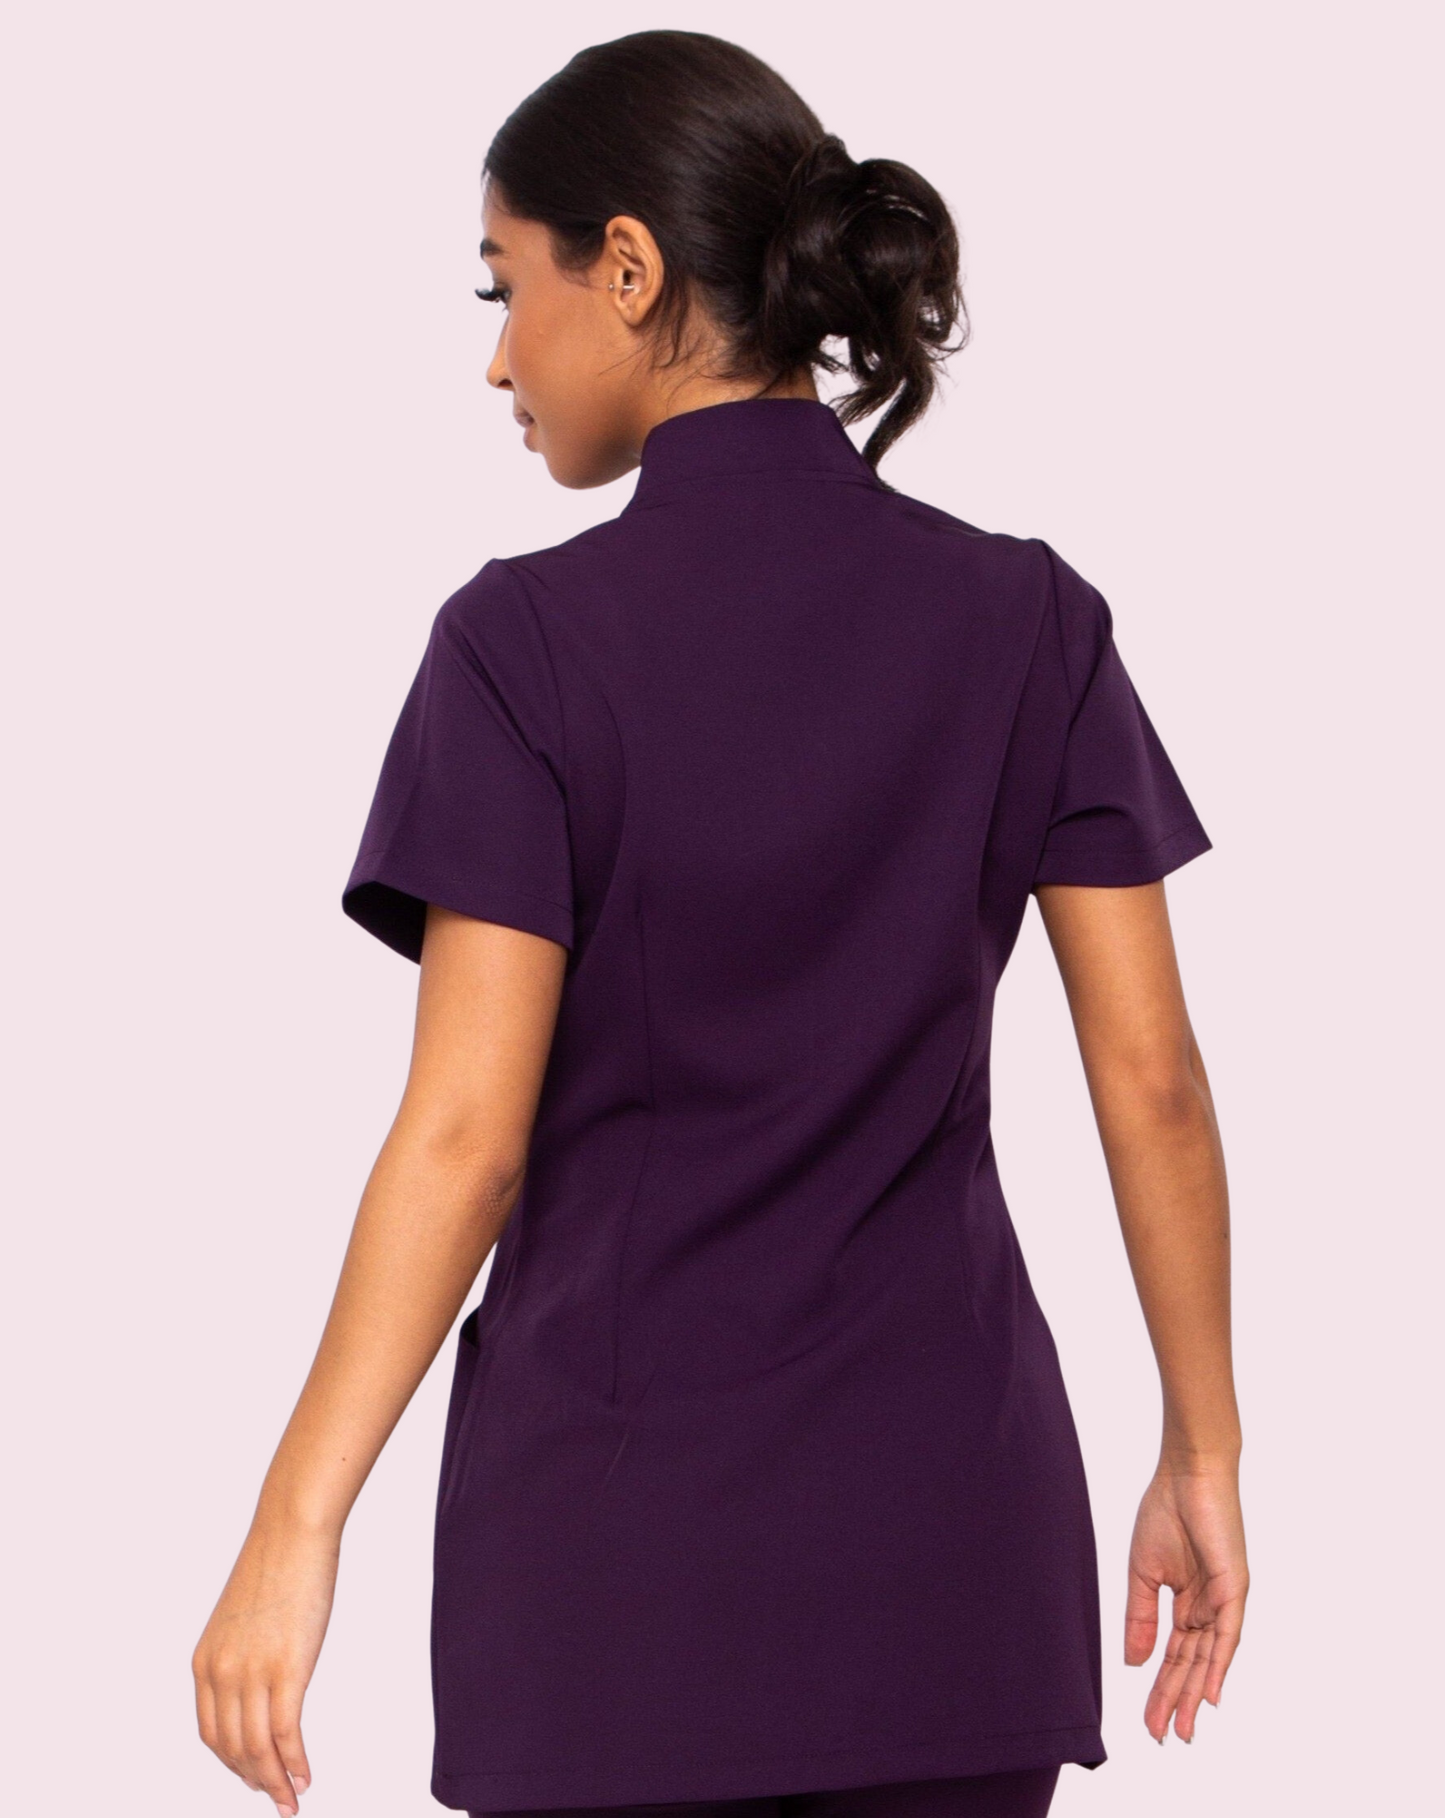 Allure Healthcare Tunic with Pockets